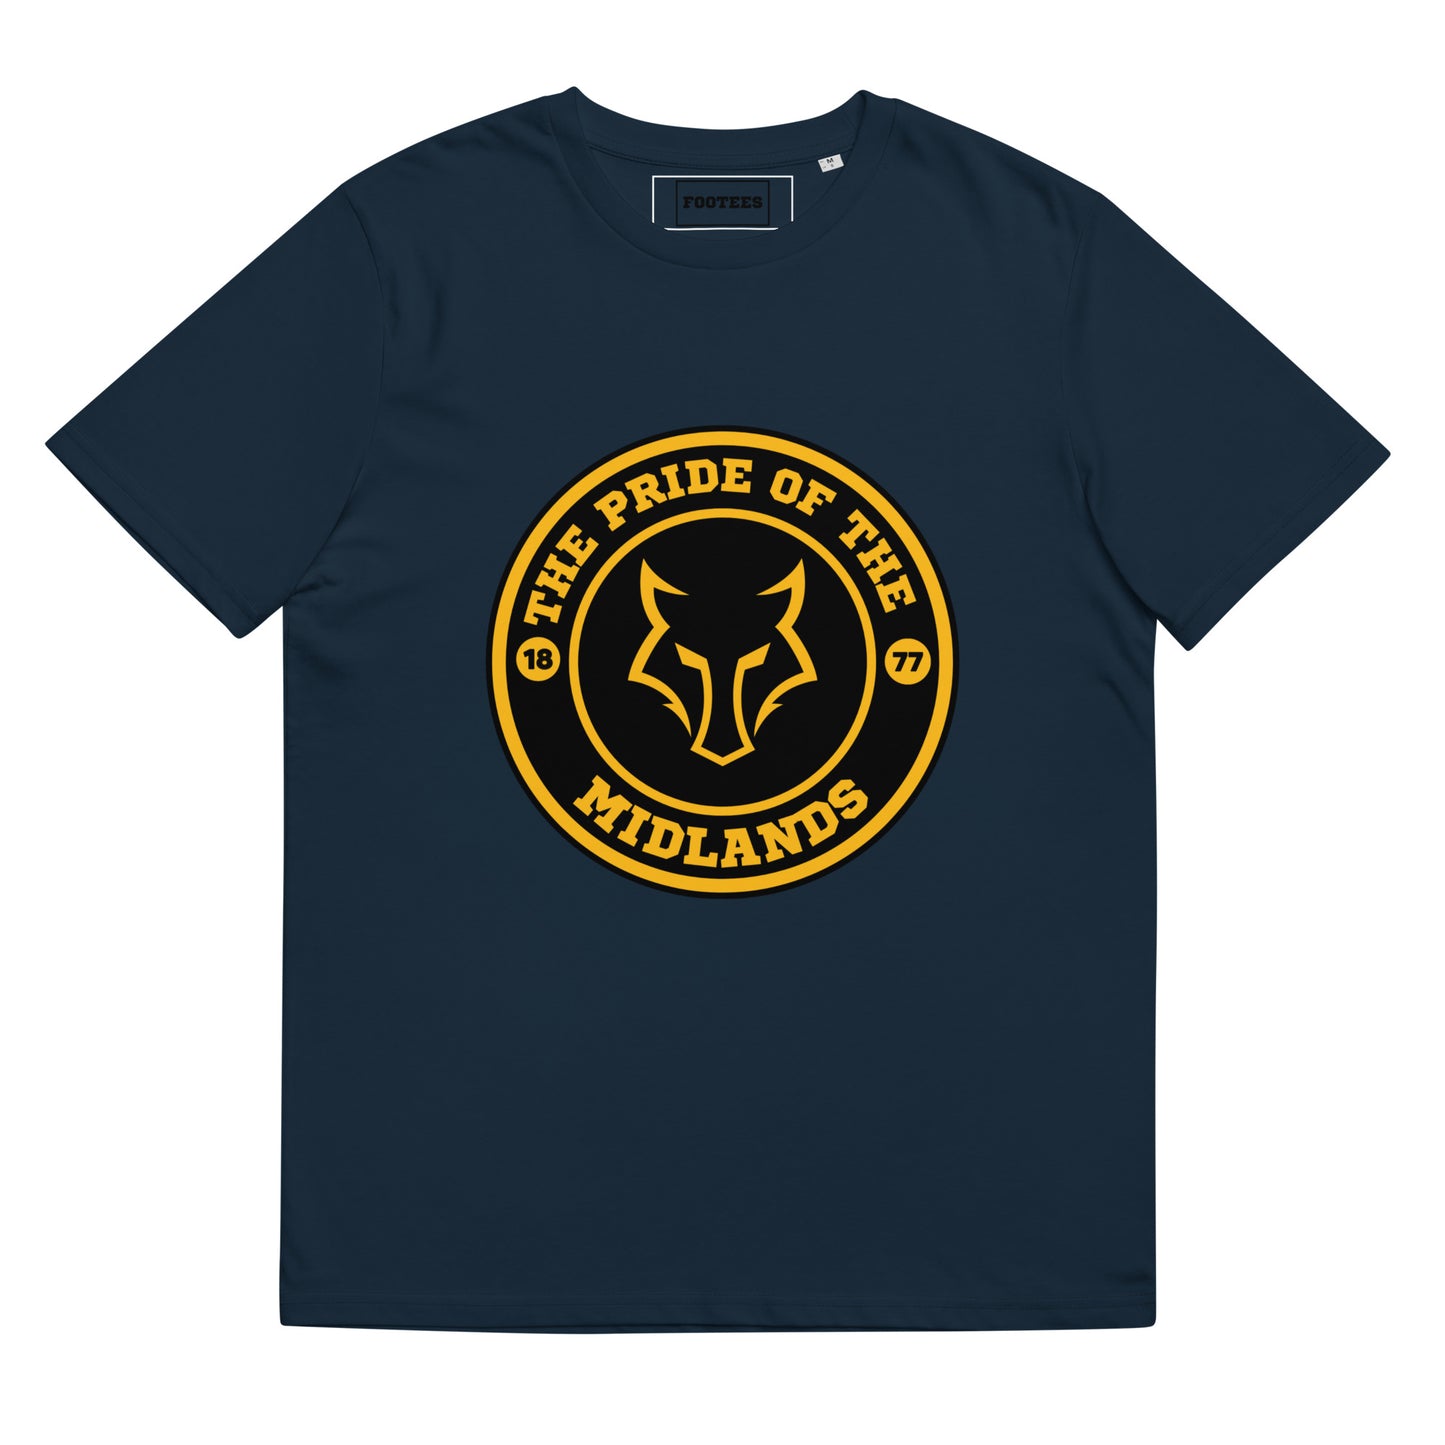 The Pride of the Midlands WWFC Tee